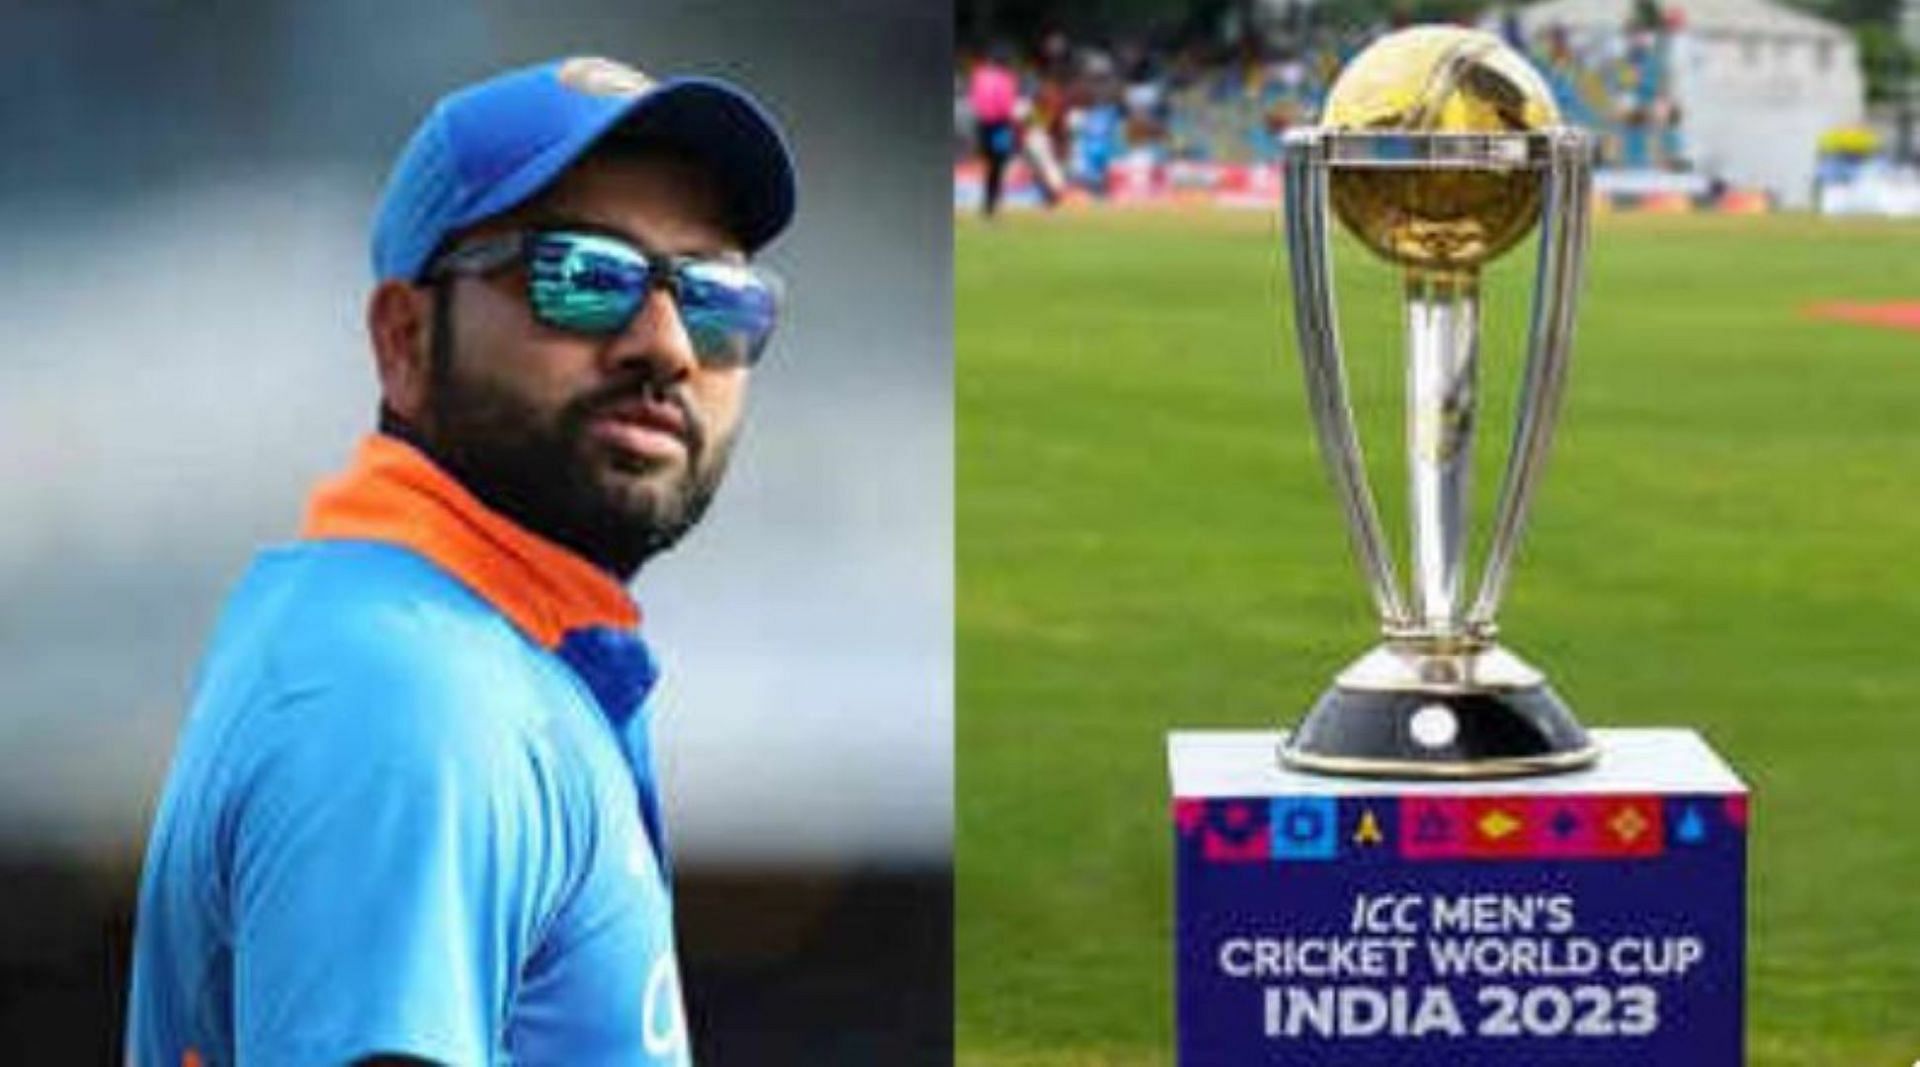 Rohit Sharma will look to join MS Dhoni and Kapil Dev in leading India to World Cup glory